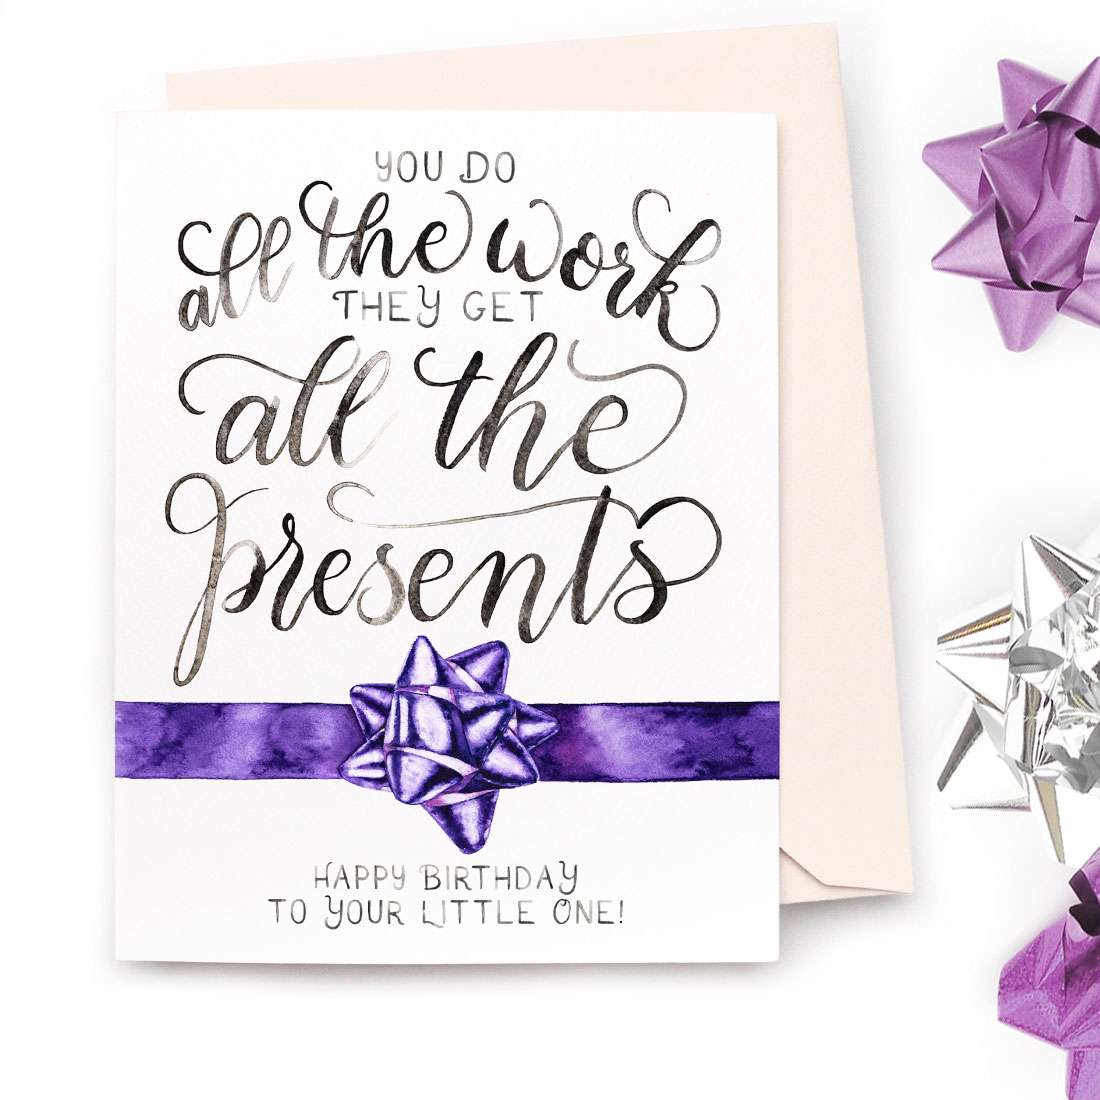 Image of a hand-lettered watercolor card saying "you do all the work, they get all the presents... happy birthday to your little one" with a painted gift bow by CharmCat | charmcat.net